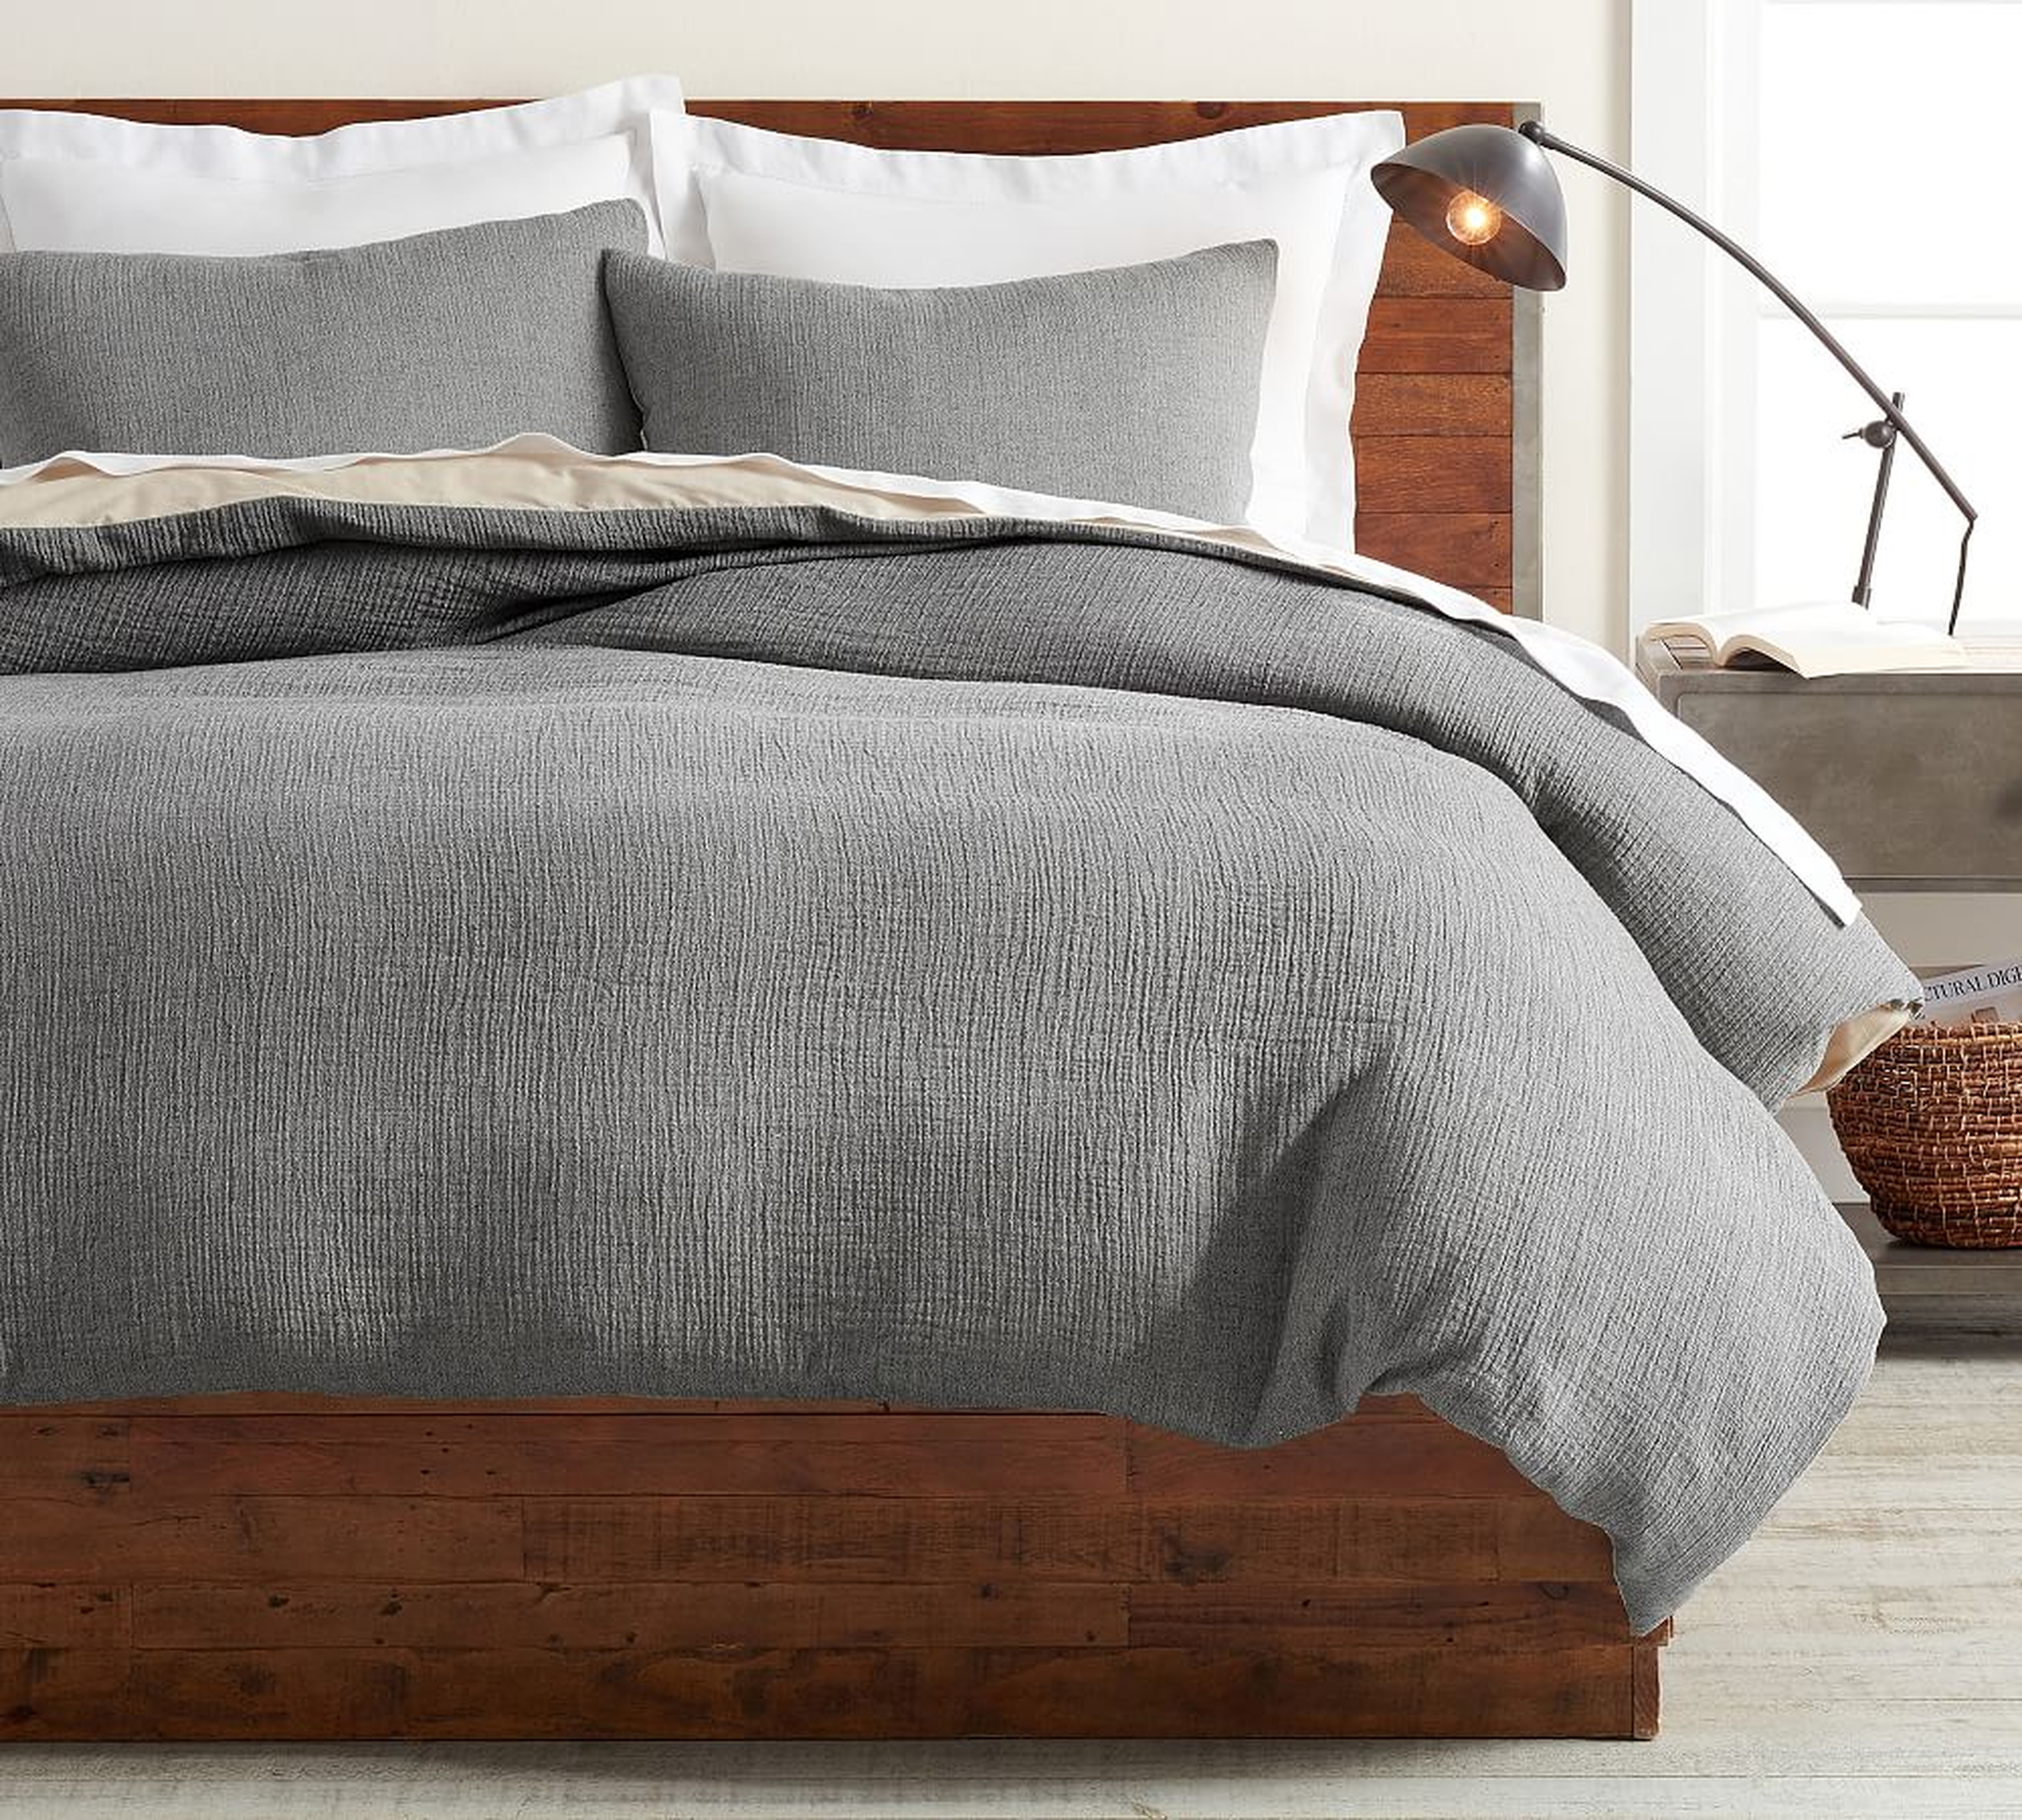 Charcoal Soft Cotton Duvet Cover, Full/Queen - Pottery Barn